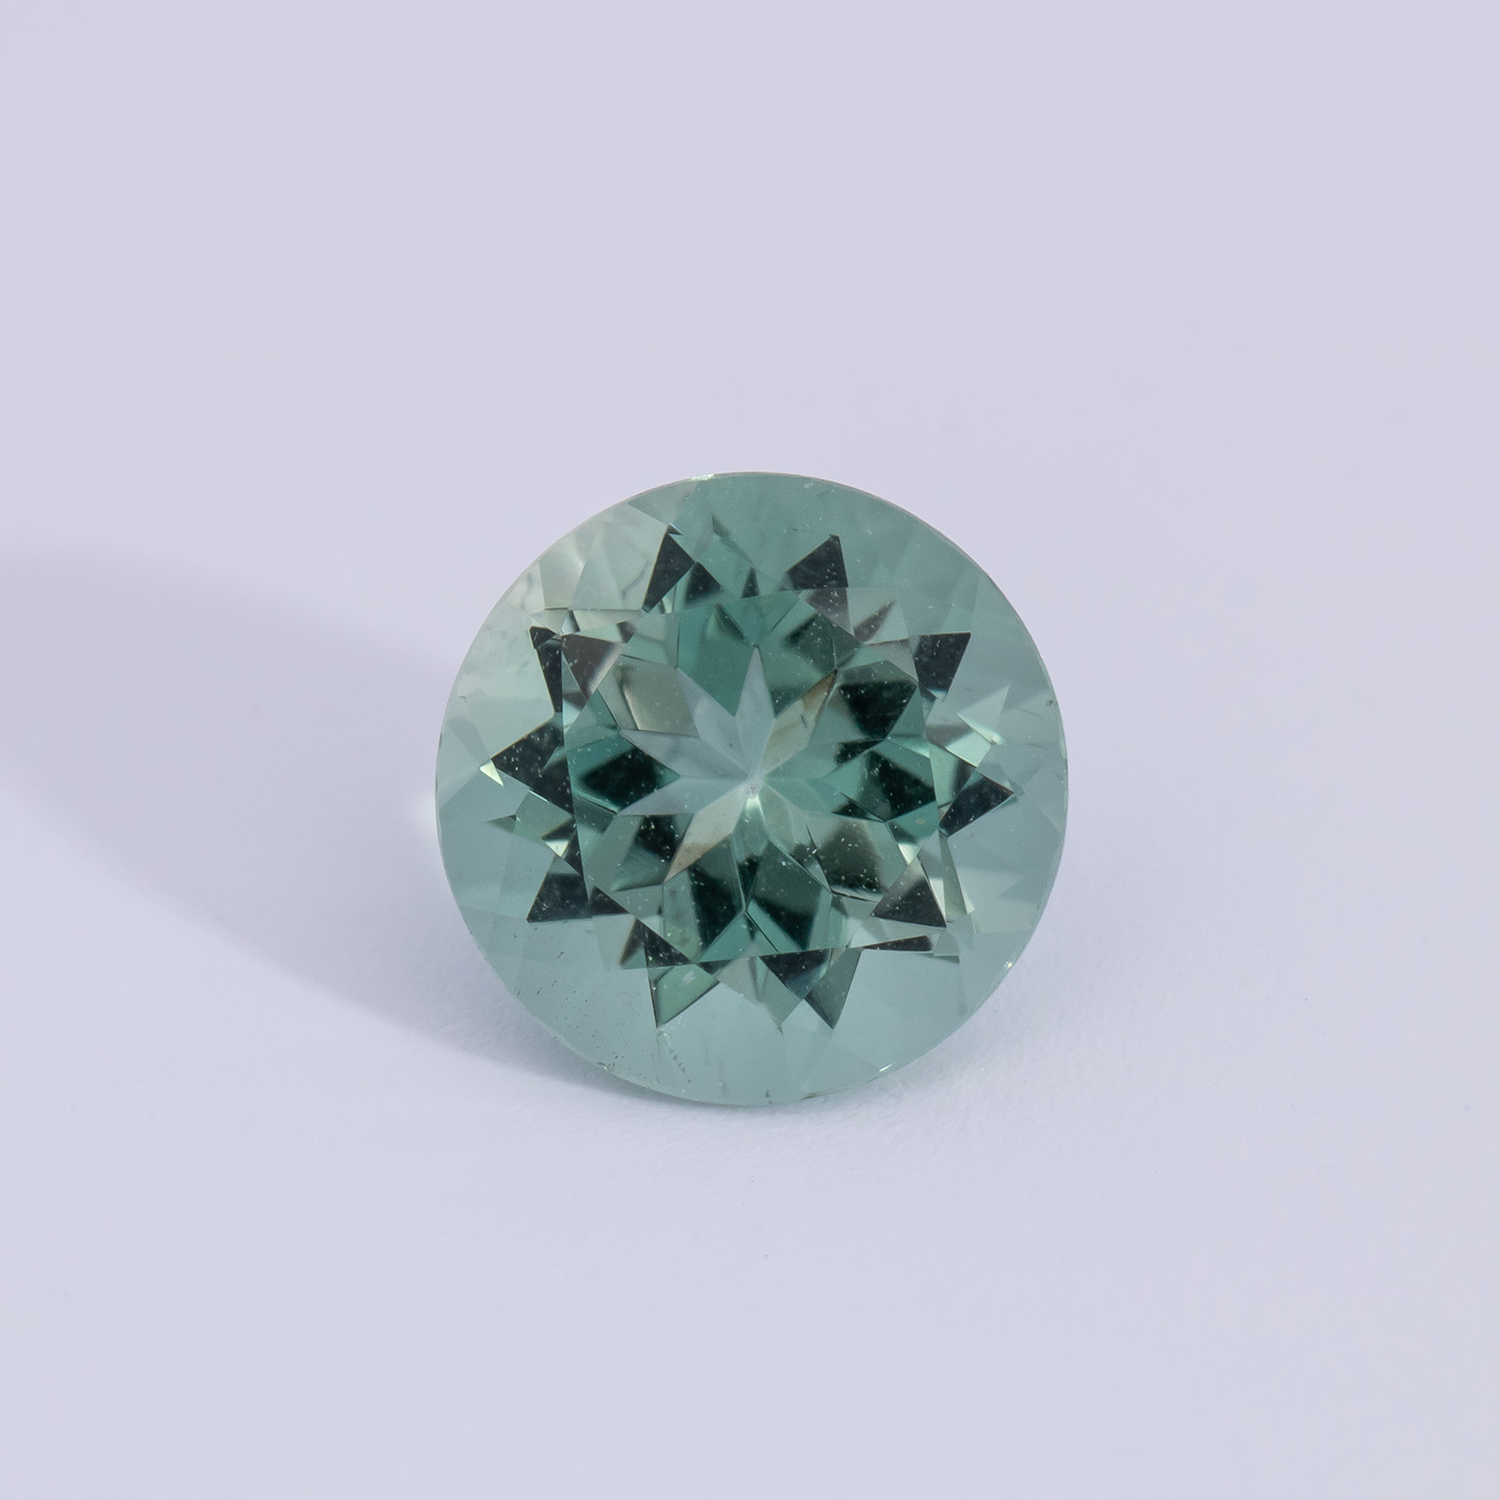 Beryl - green, round, 6.1x6.1 mm, 0.76 cts, No. BY90039